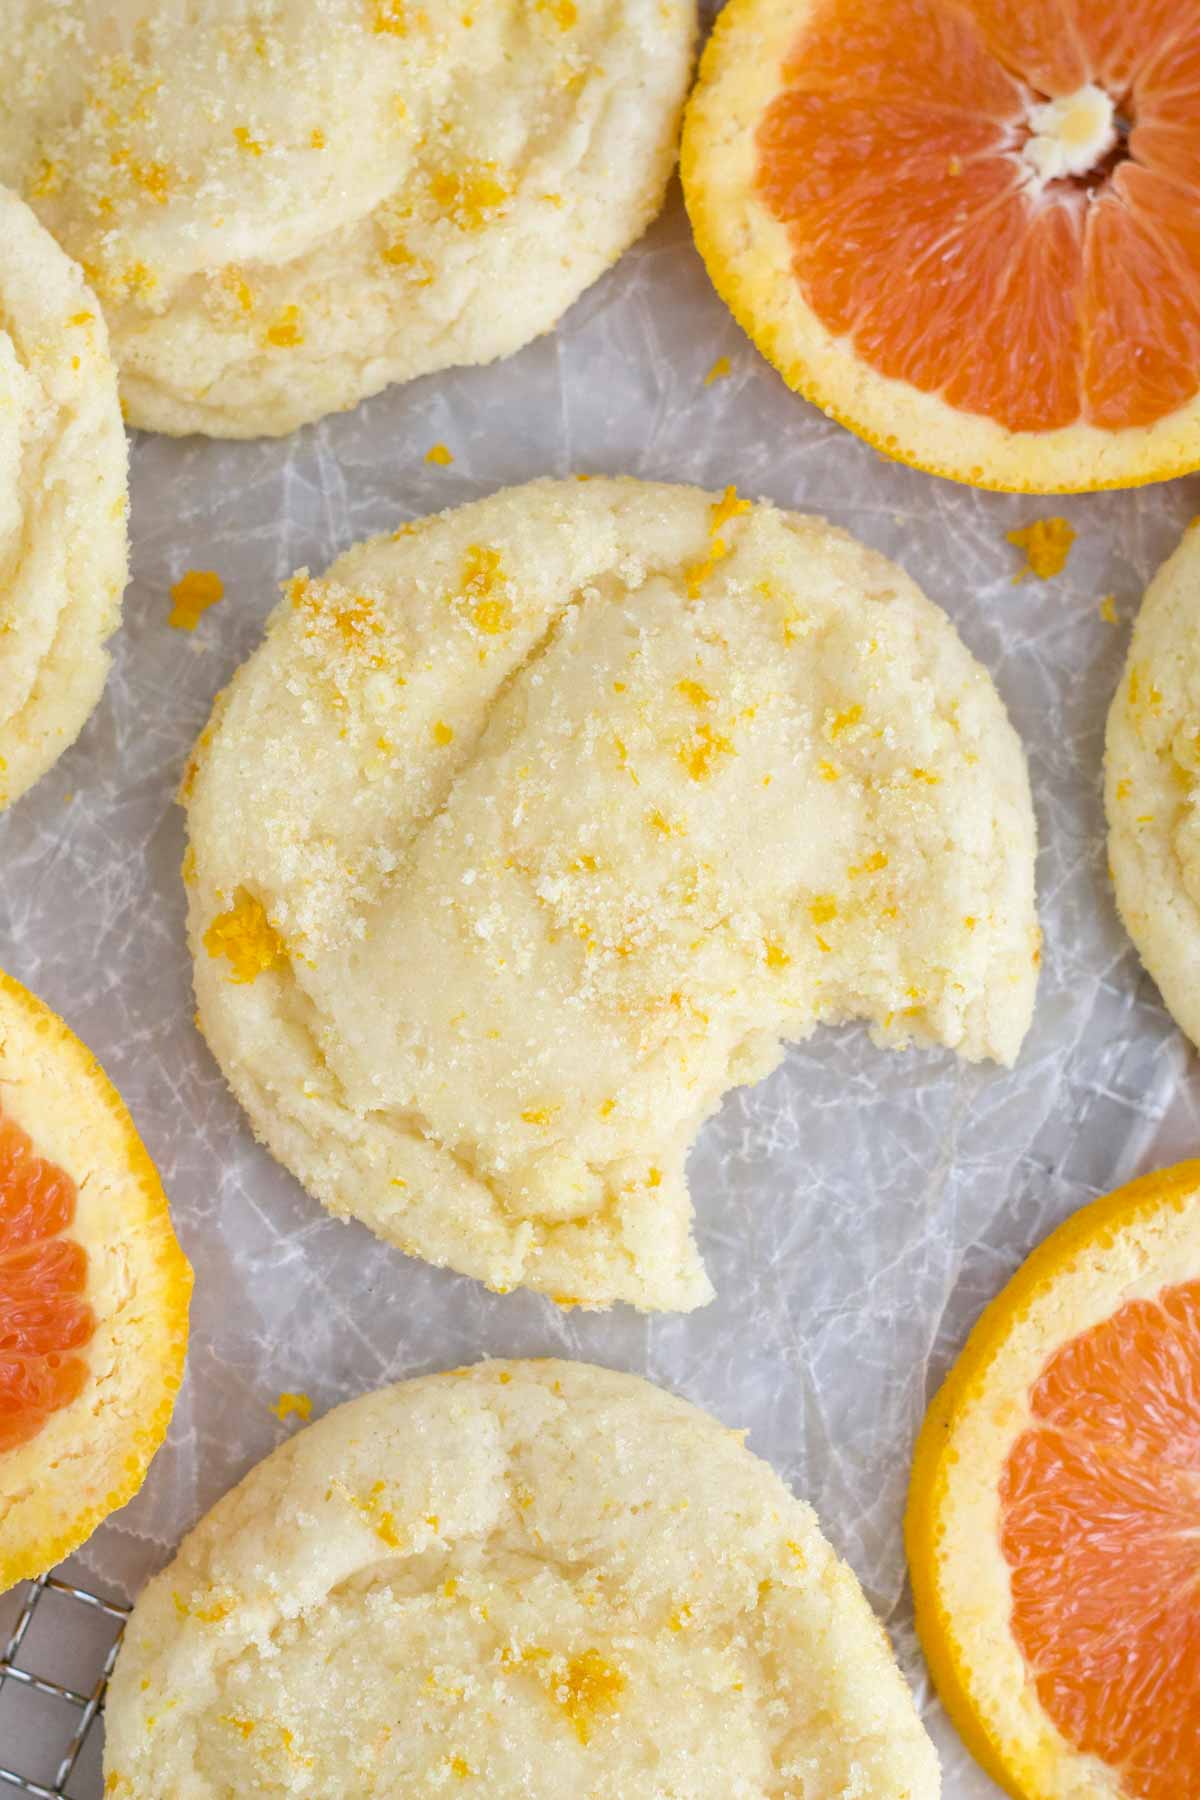 An sugary Orange Cookie with a bite taken, ready to be finished.